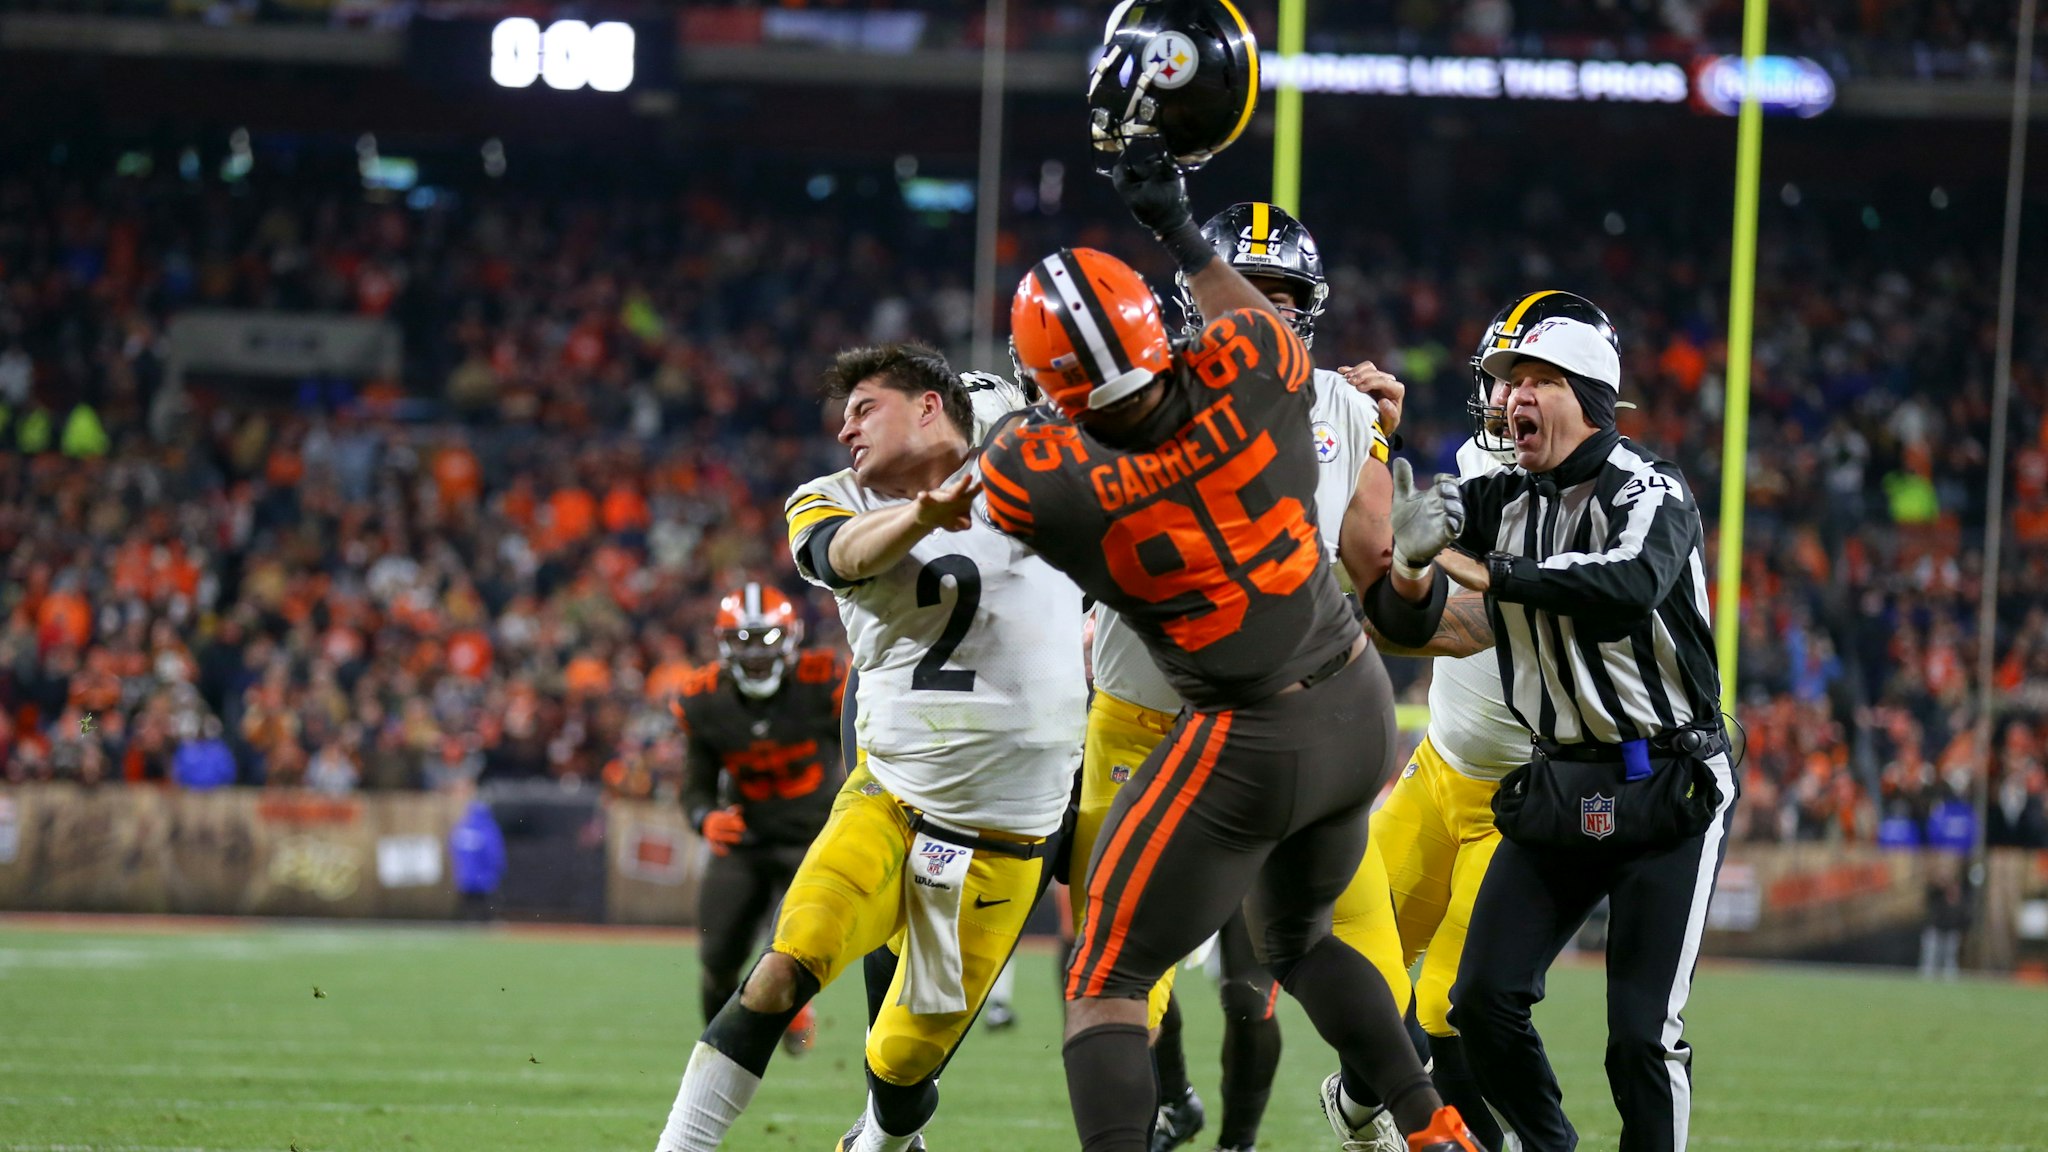 Cleveland Browns defensive end Myles Garrett (95) swings at Pittsburgh Steelers quarterback Mason Rudolph (2) with Rudolphs own helmet with 0:08 seconds left in the fourth quarter of the National Football League game between the Pittsburgh Steelers and Cleveland Browns on November 14, 2019, at FirstEnergy Stadium in Cleveland, OH.